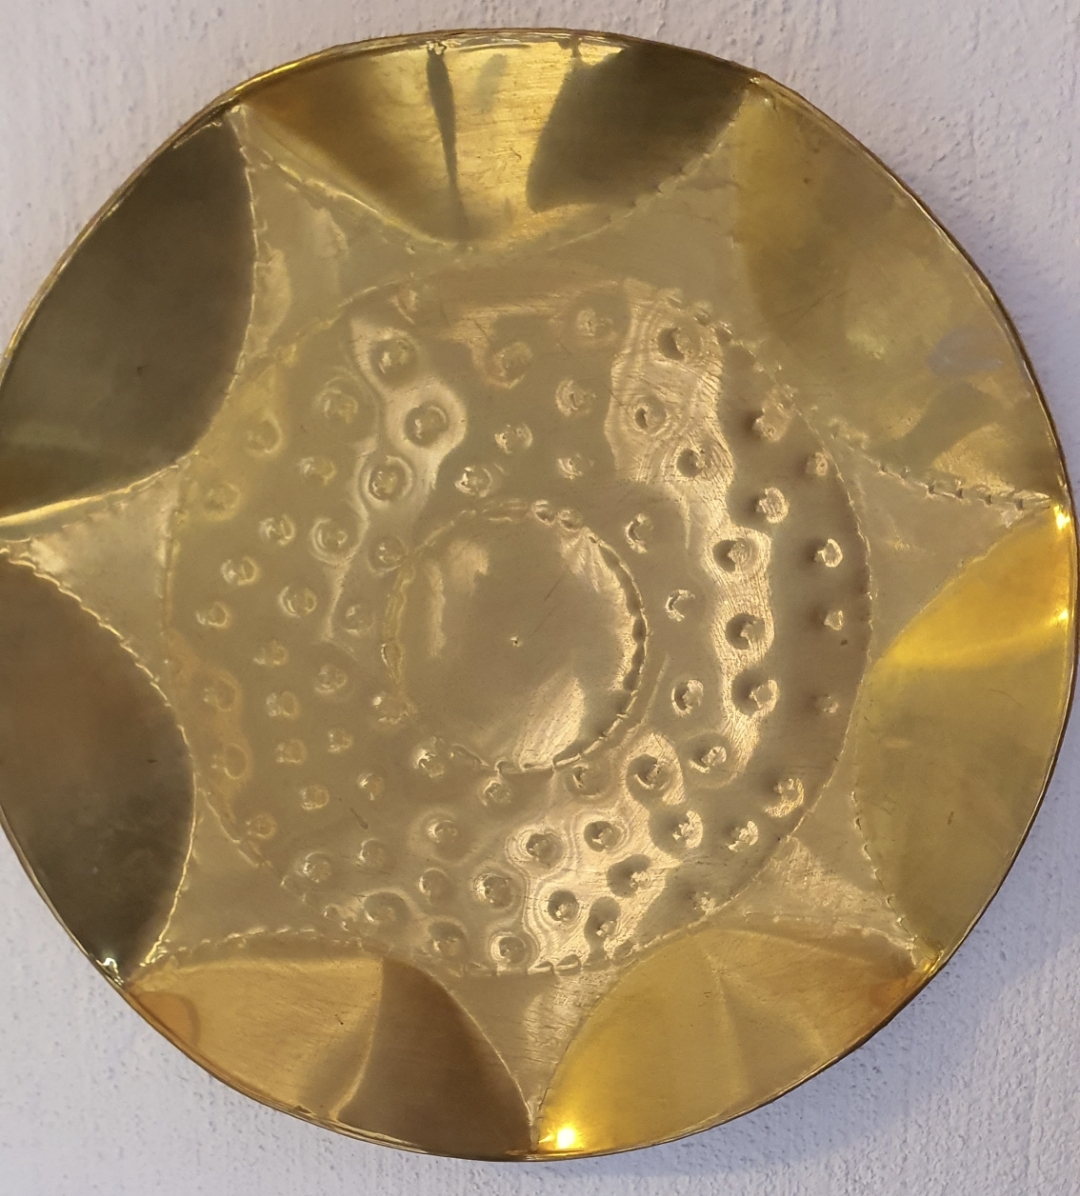 2 Large Brass Wall Decoration Plates - different sizes